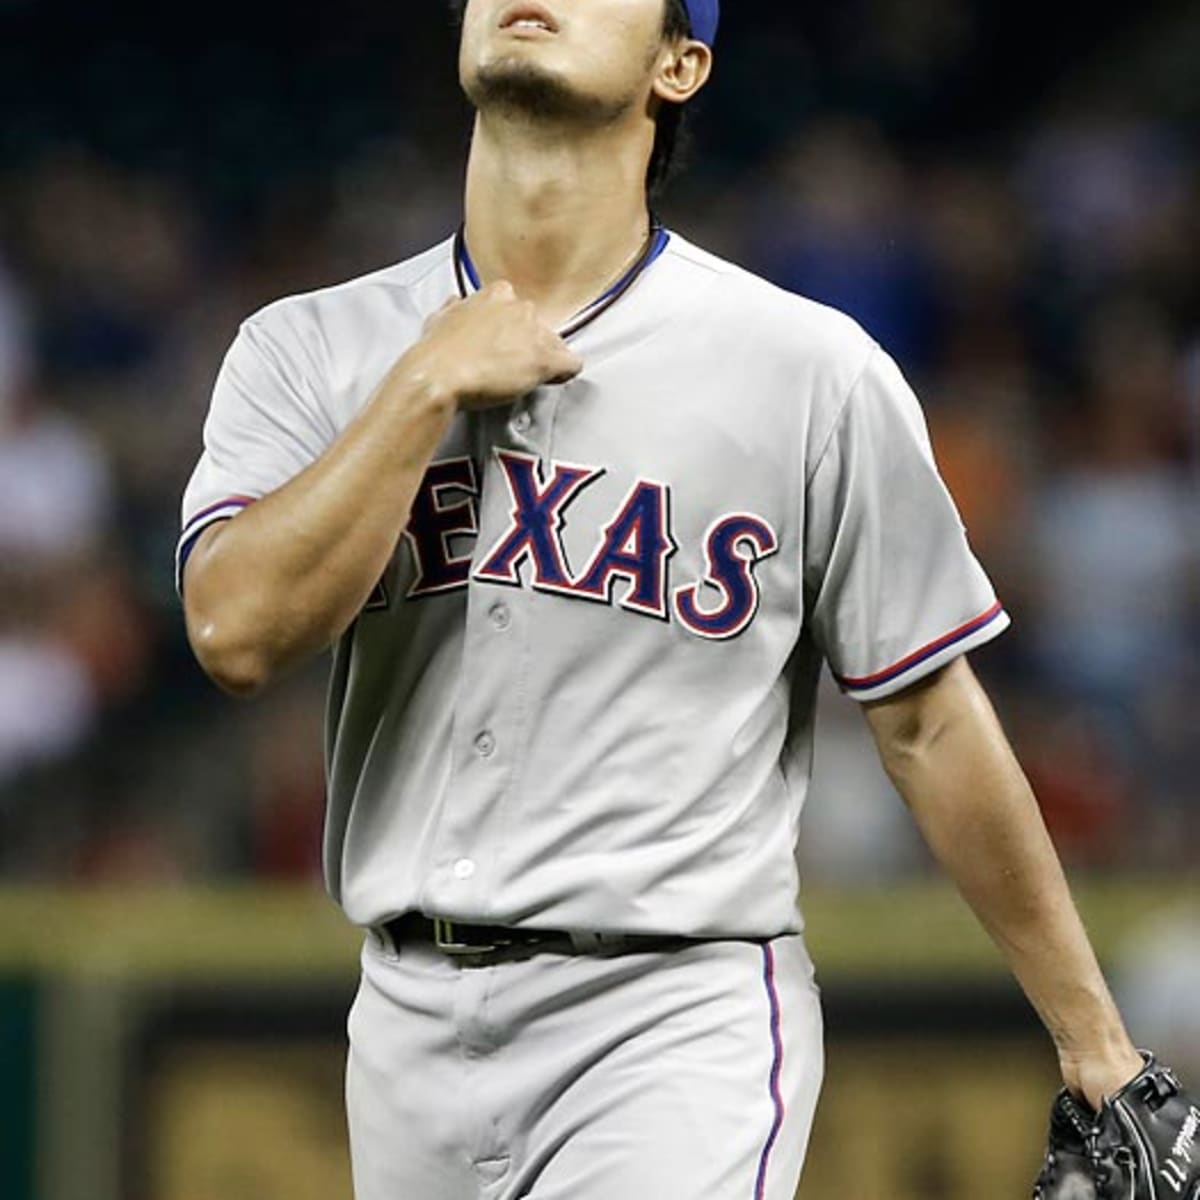 Darvish loses perfect game with two outs in ninth – Orange County Register